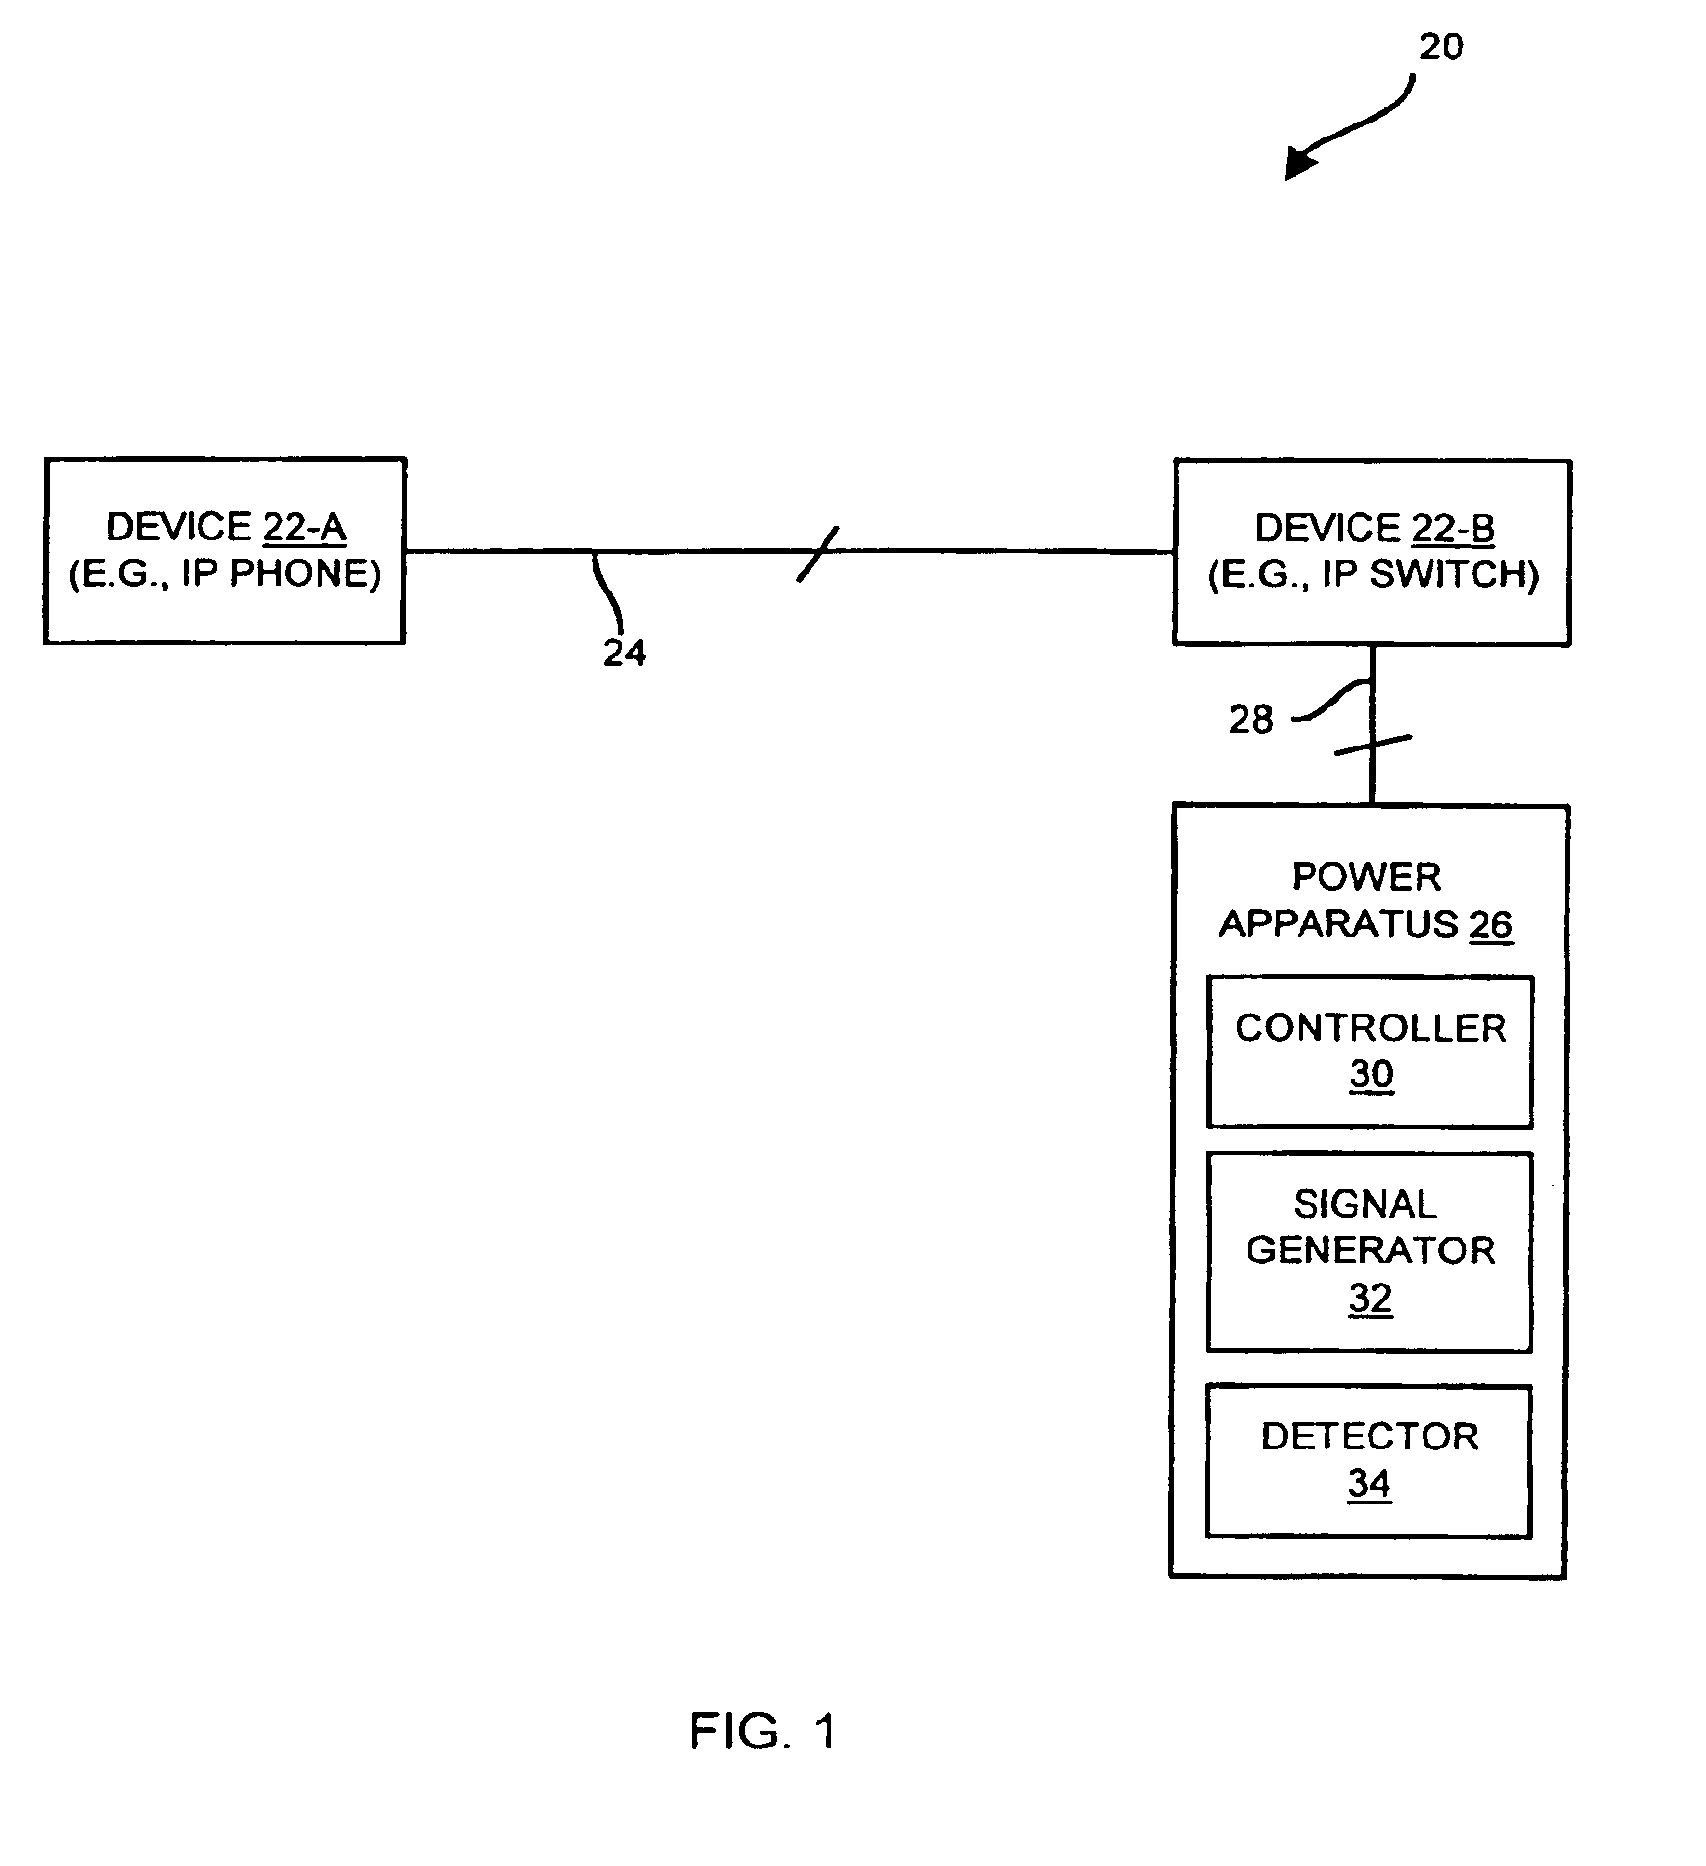 Remotely powerable device with powerability indicator for selectively indicating a backward wired device condition and a remotely powerable device condition